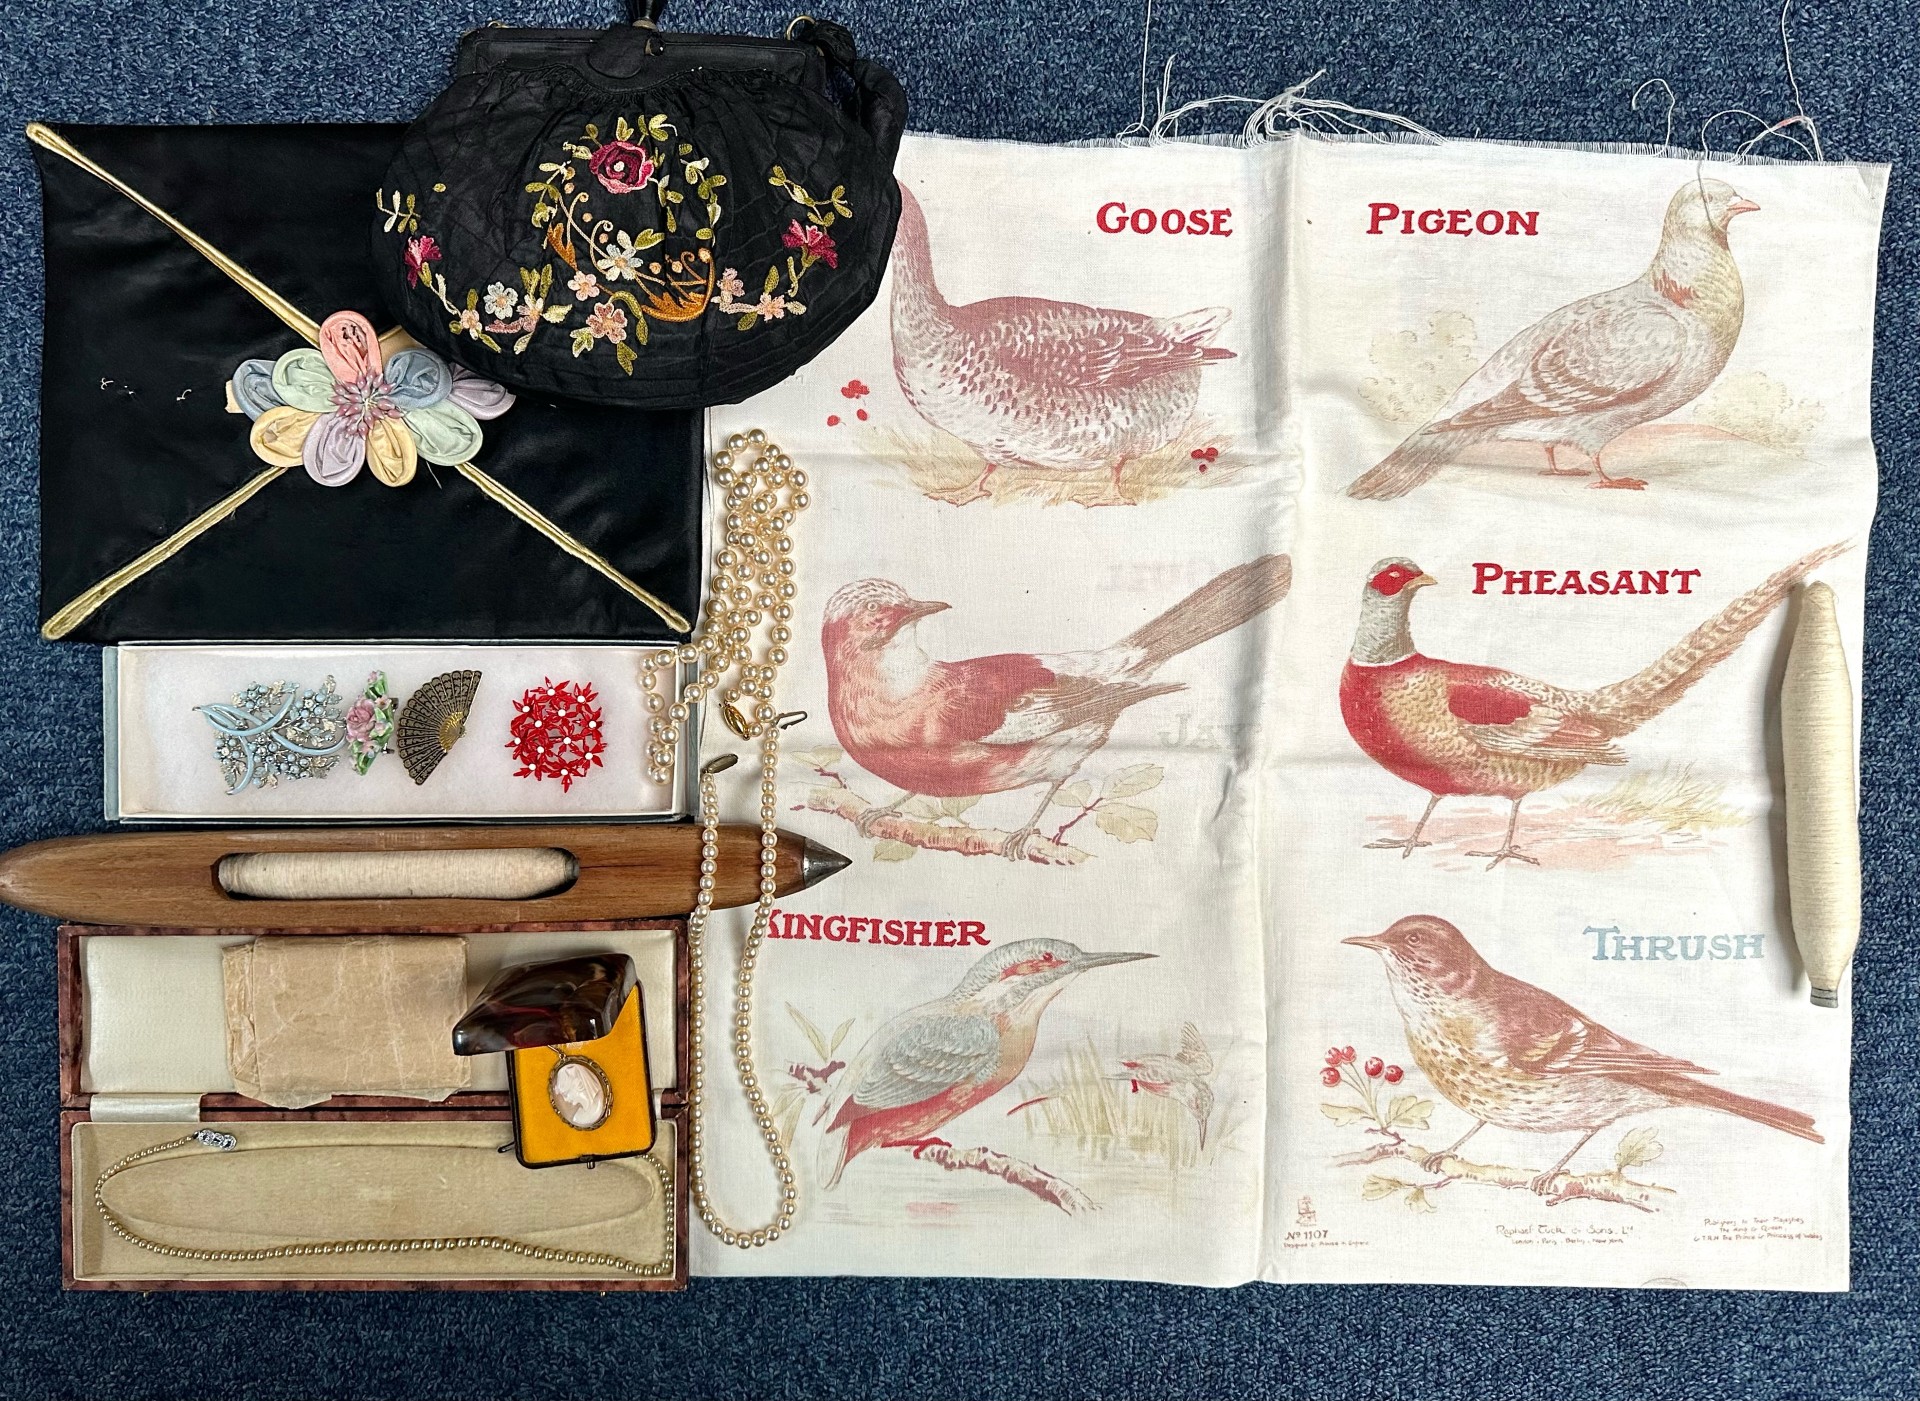 Vintage Collection of Items, including a black silk and embroidery handbag, with interior mirror and